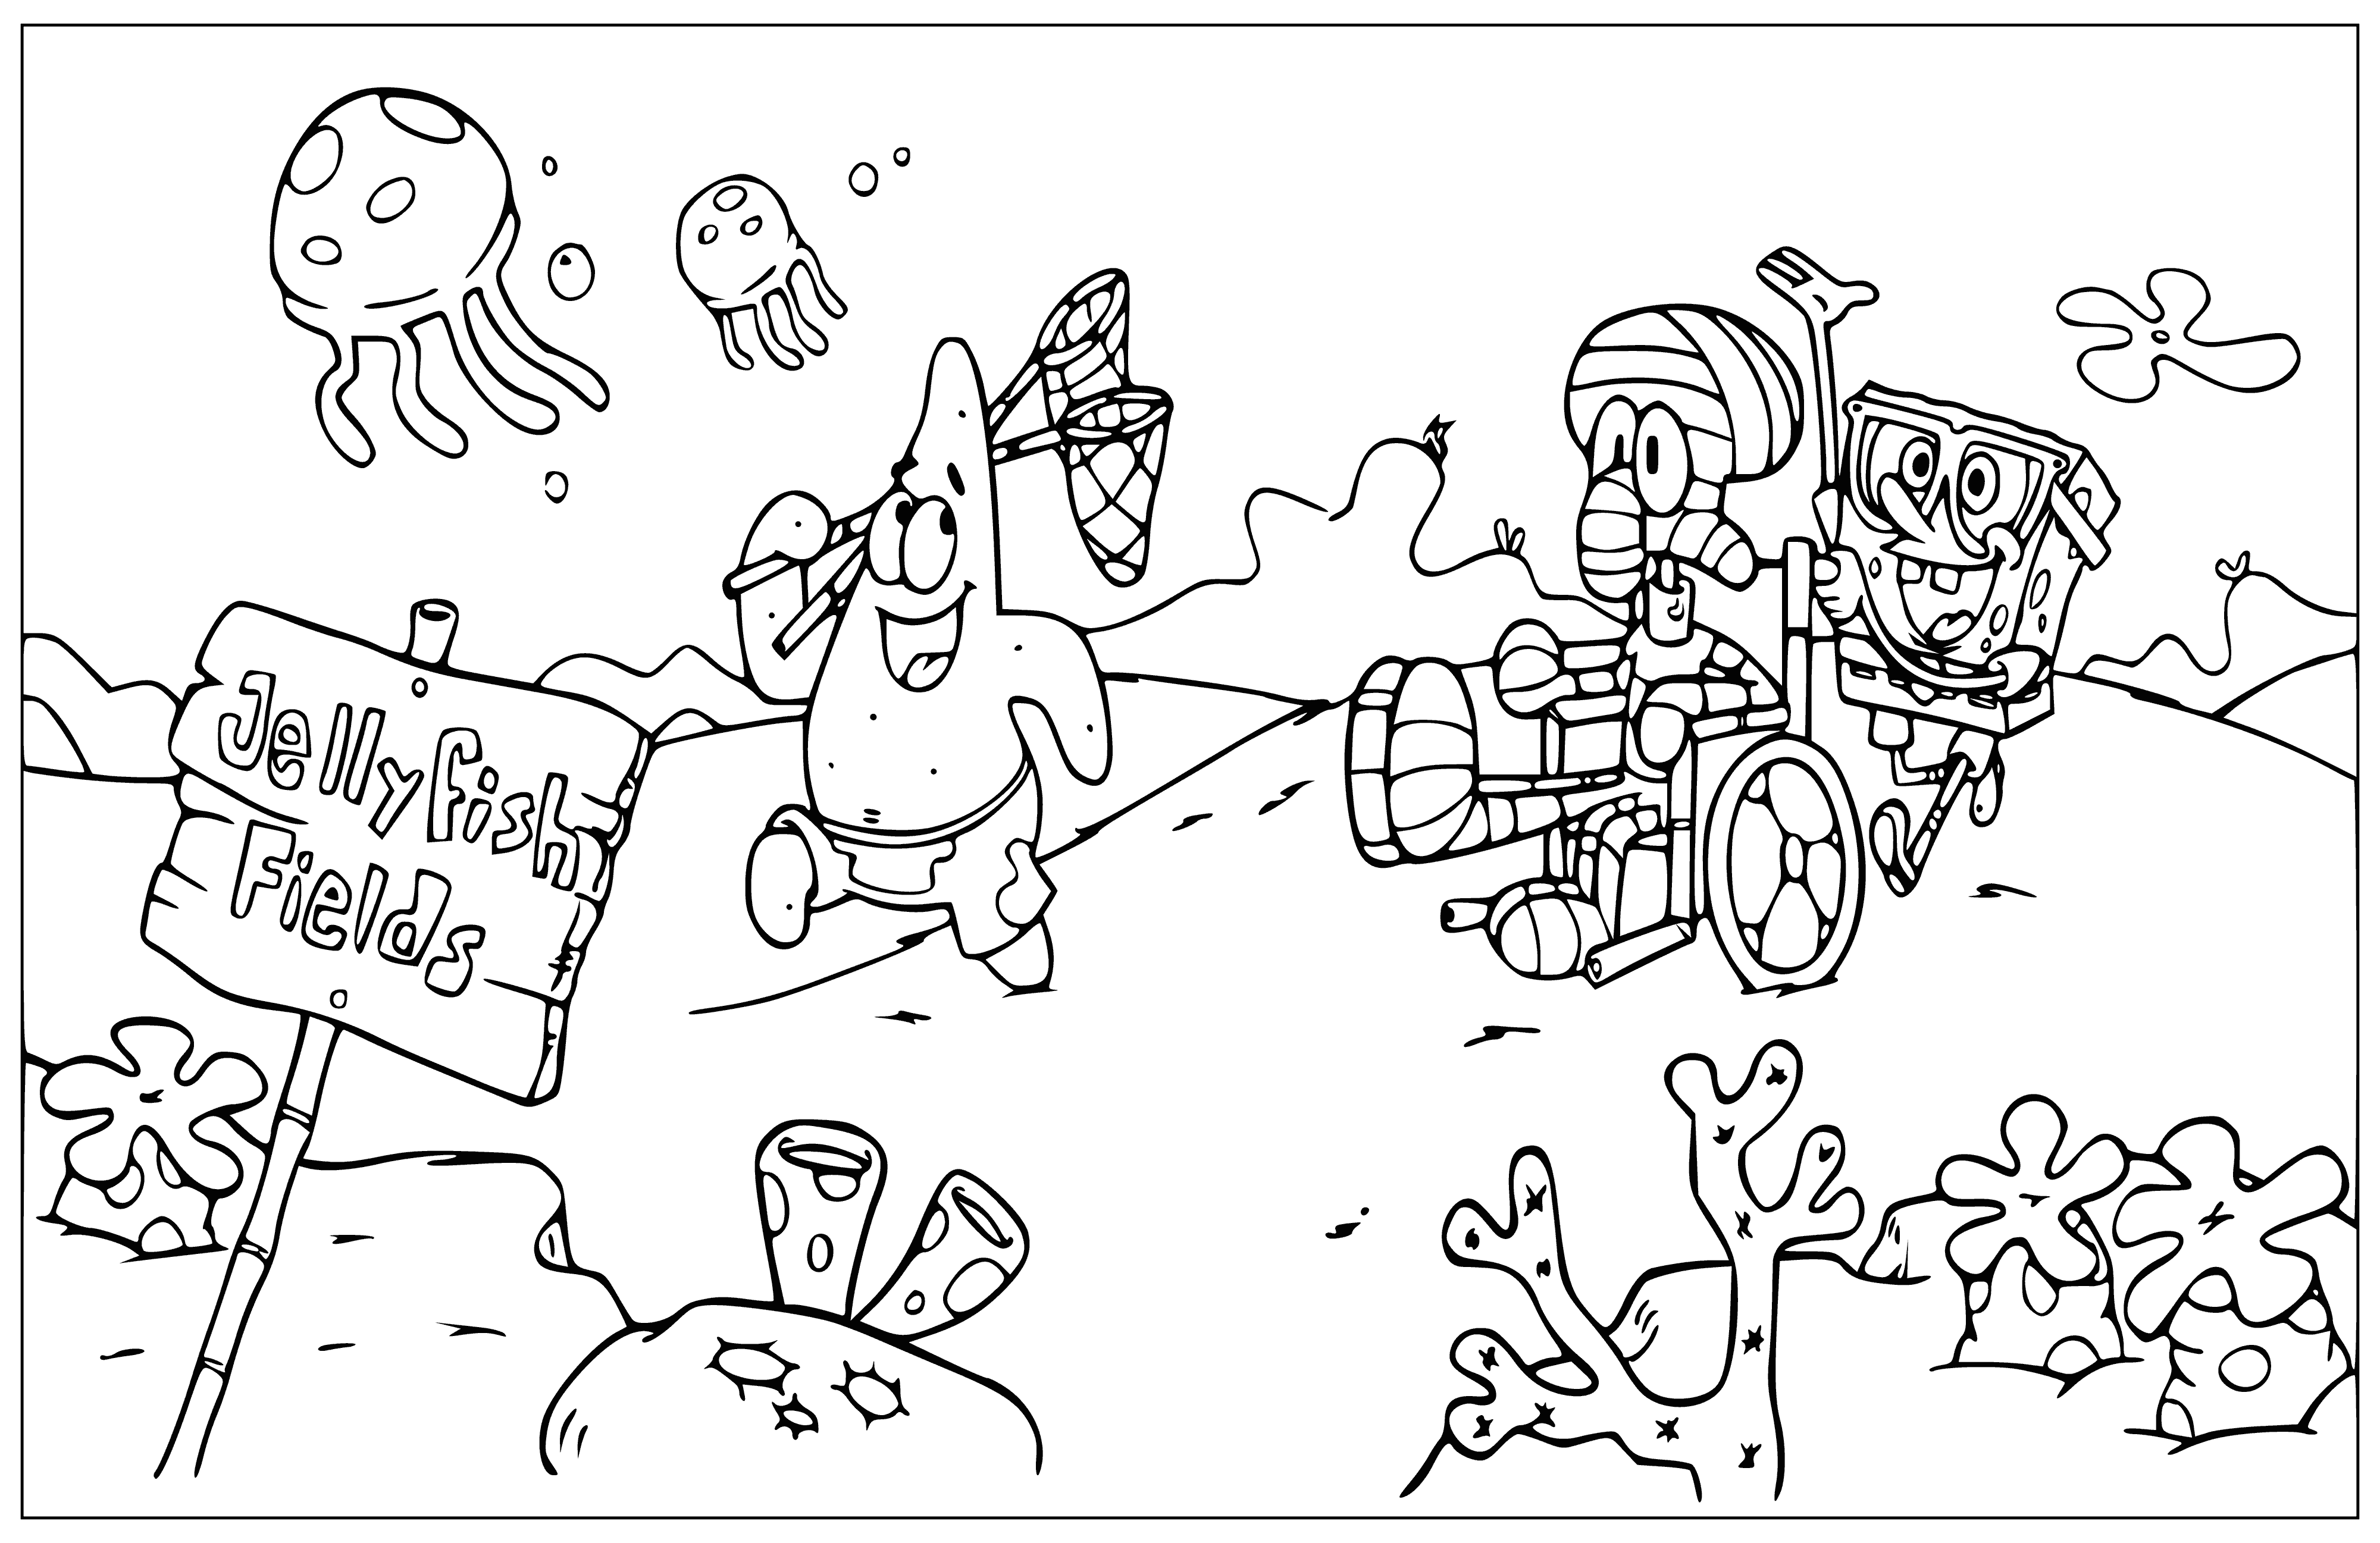 Jellyfish area ... coloring page